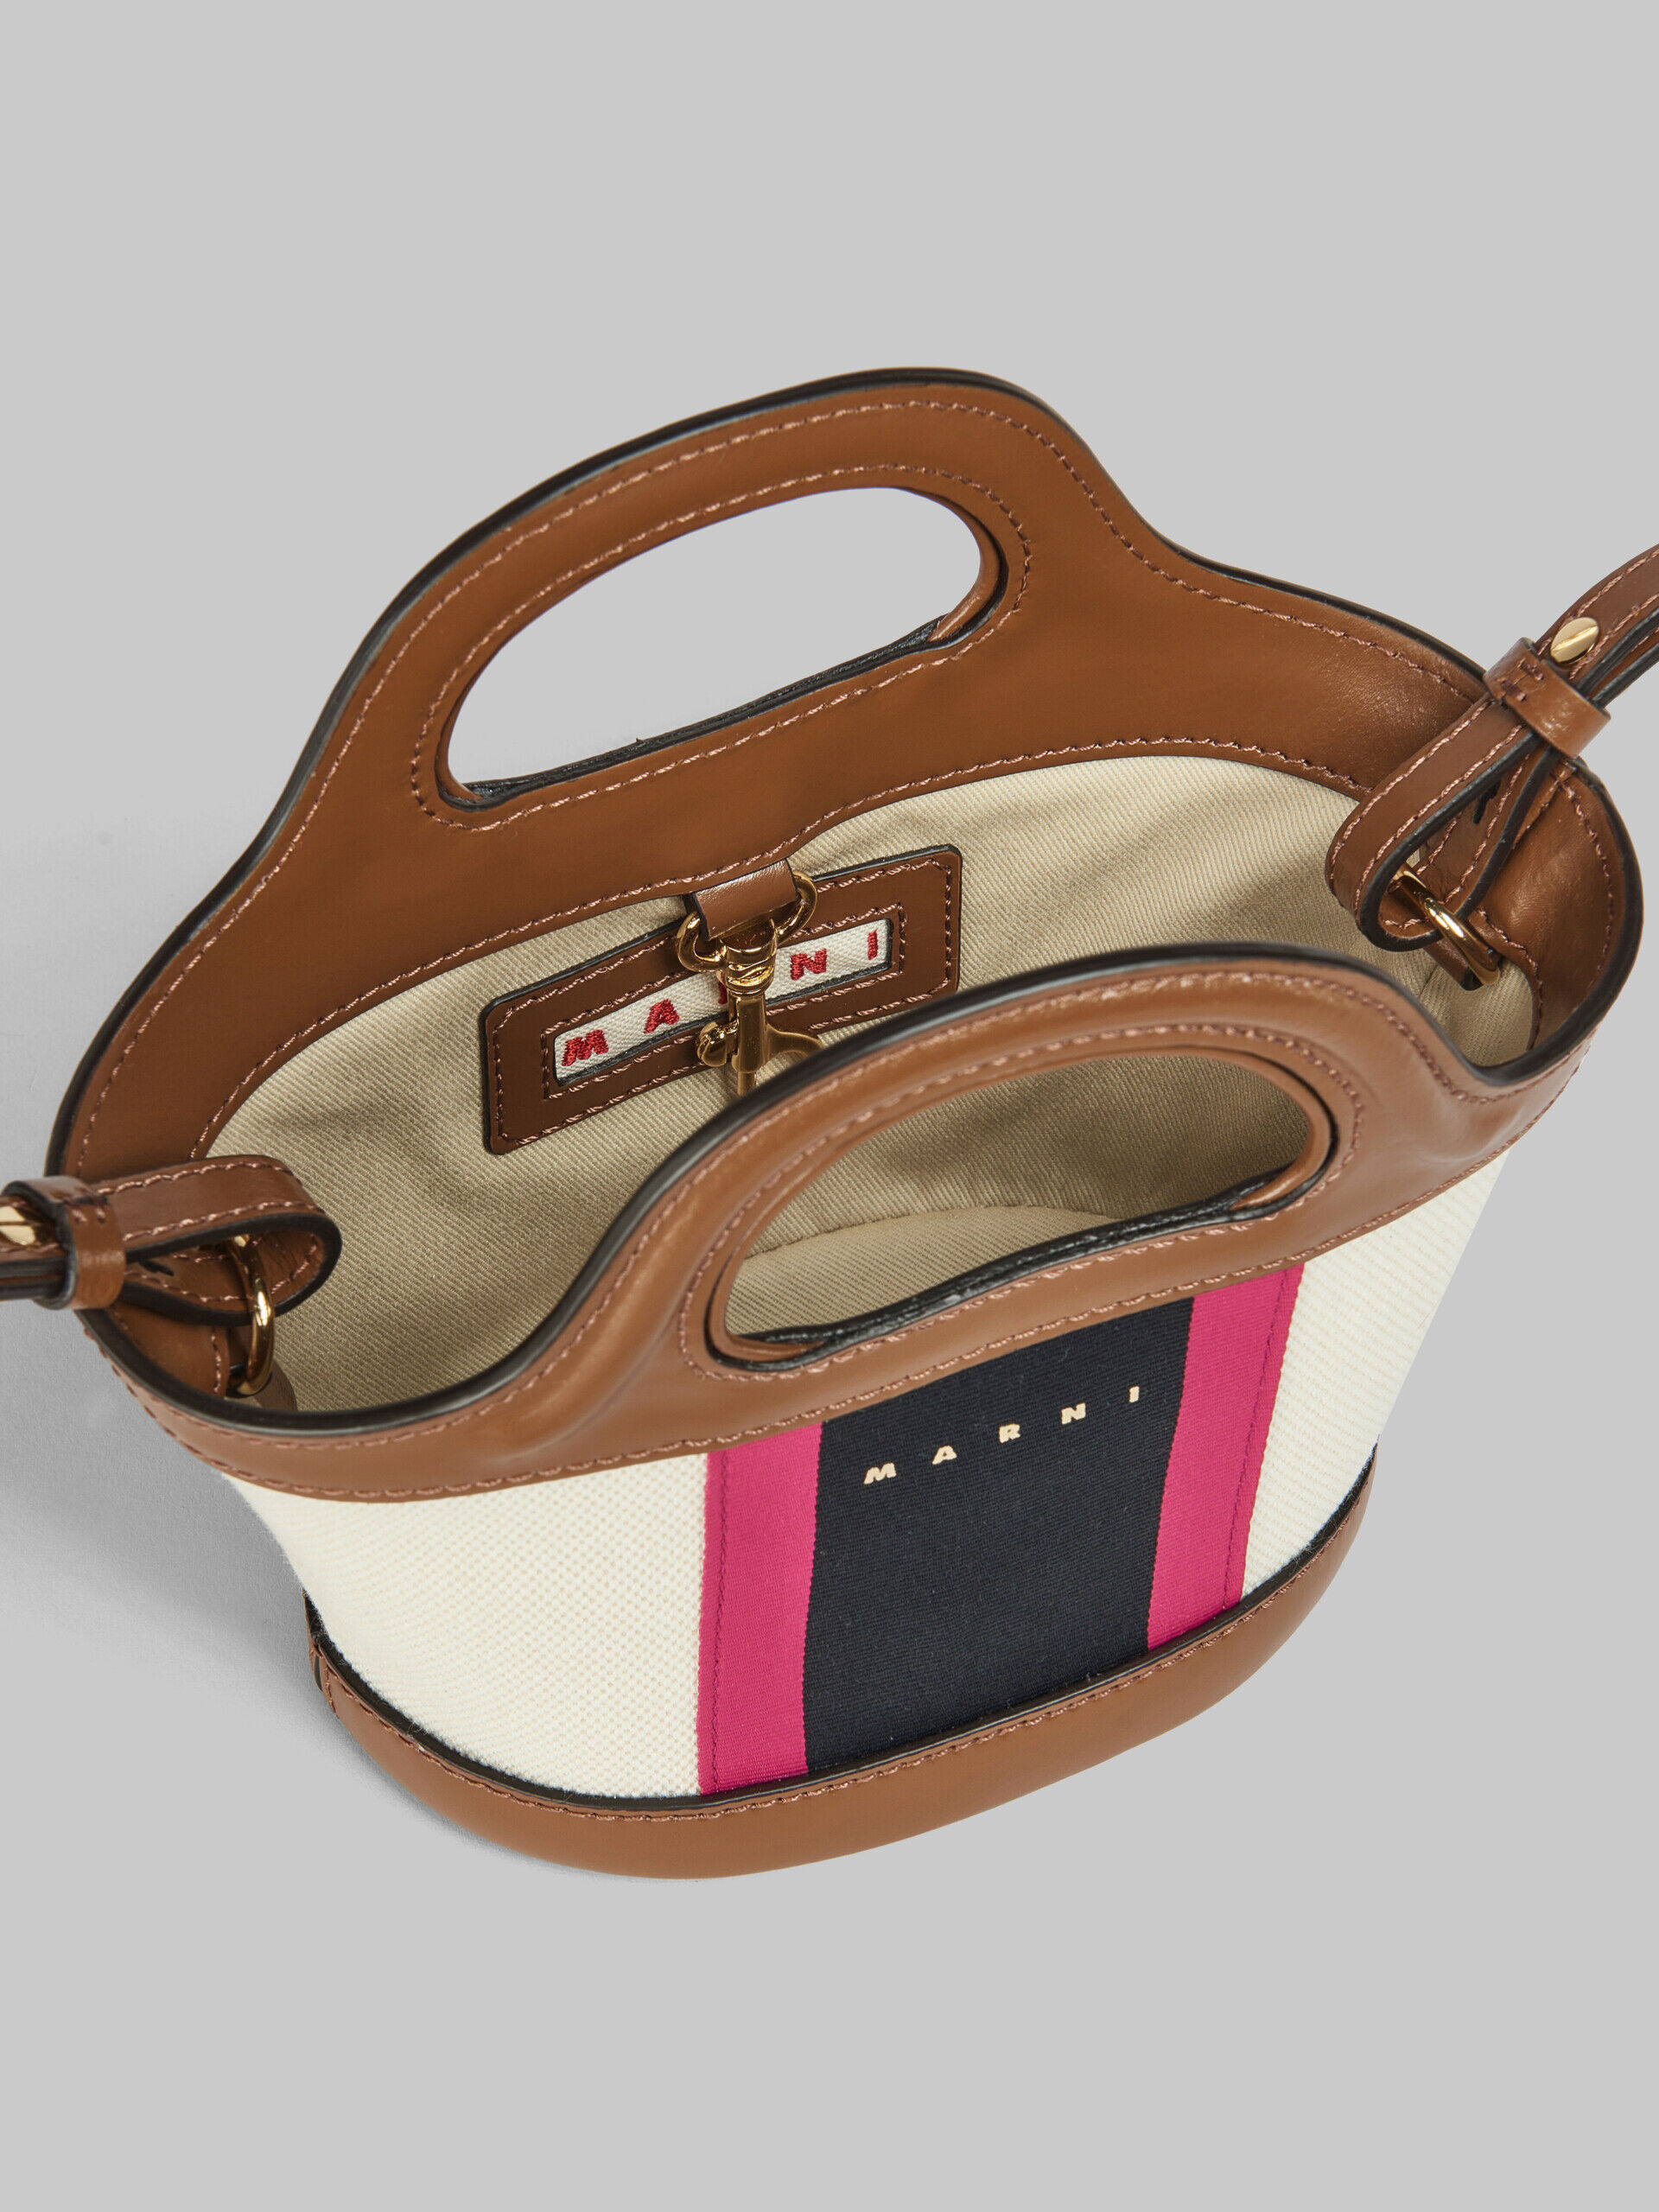 Tropicalia Micro Bag in Brown leather and striped canvas | Marni